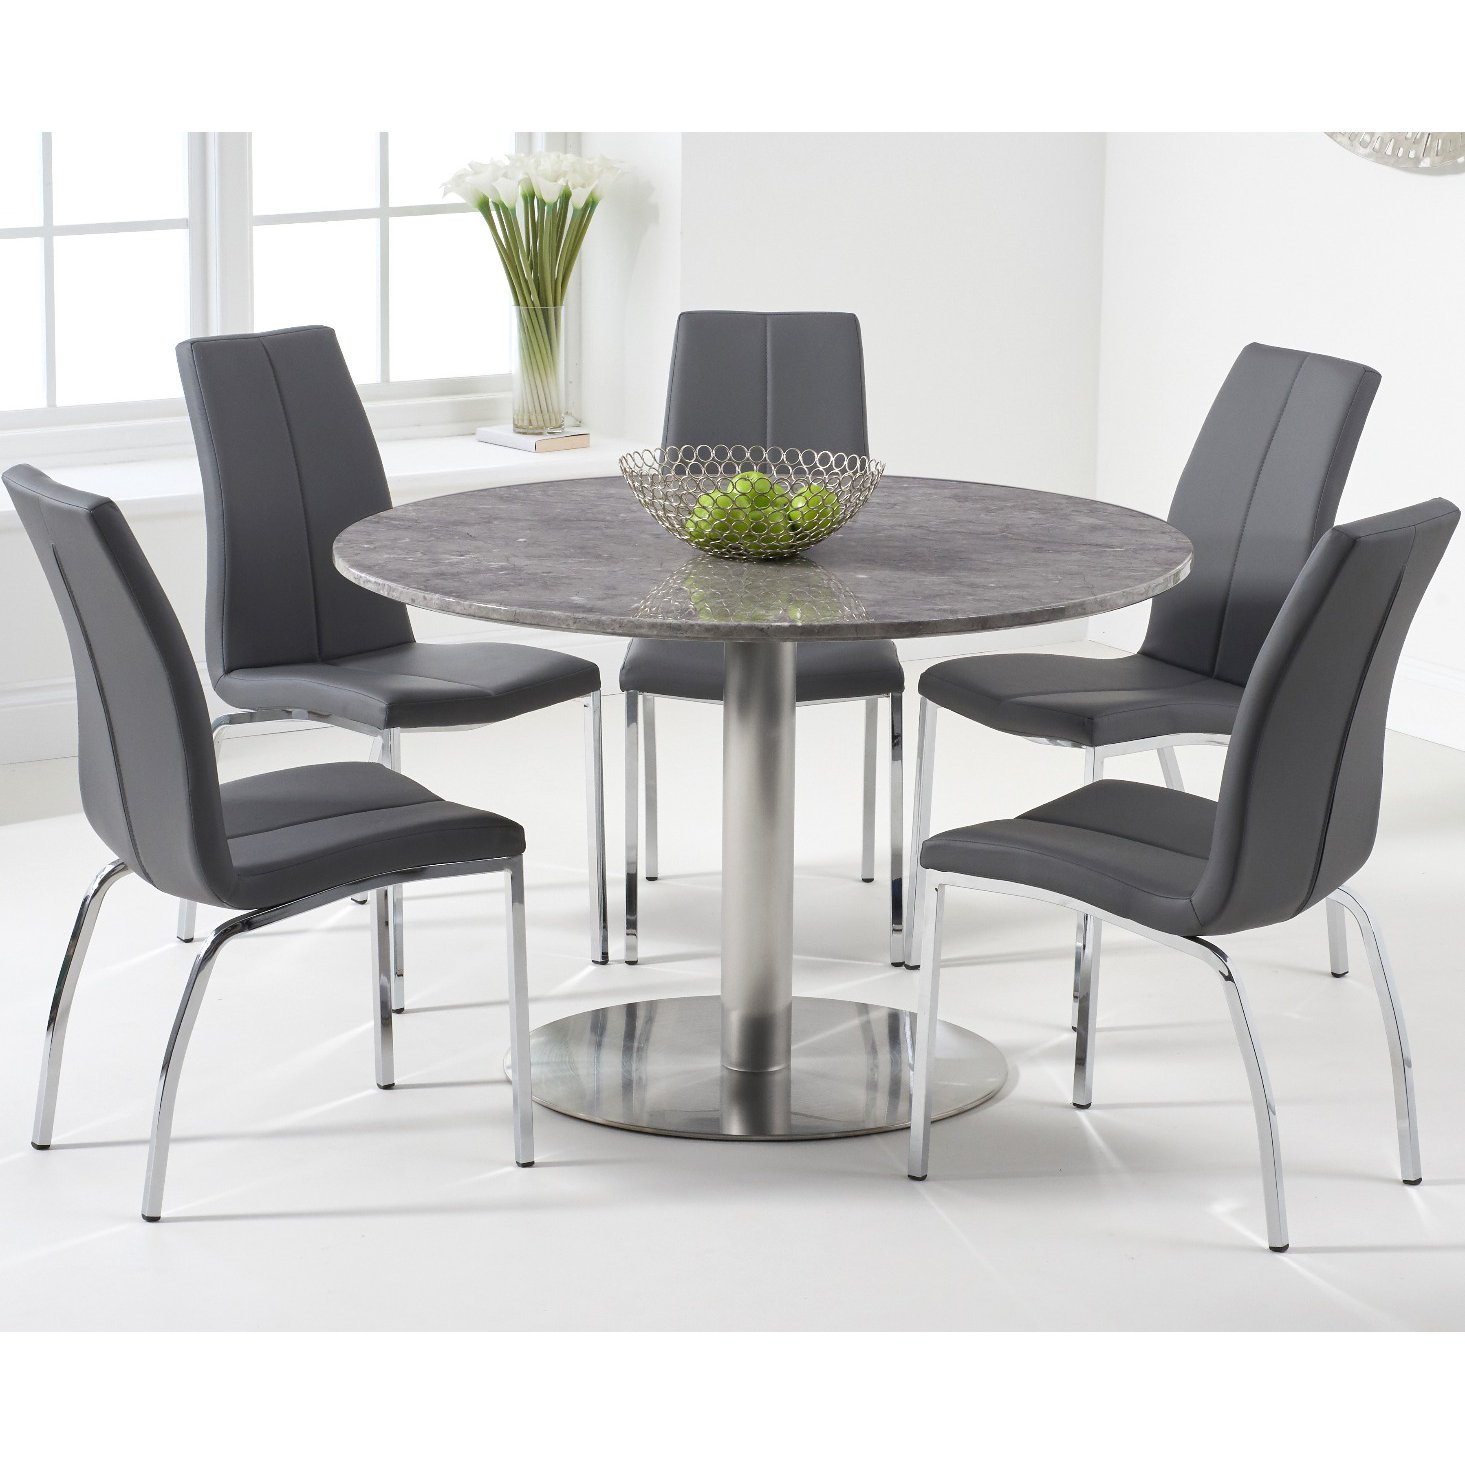 Bali 120cm Round Grey Marble Effect Dining Table With 2 Grey Cavello Dining Chairs